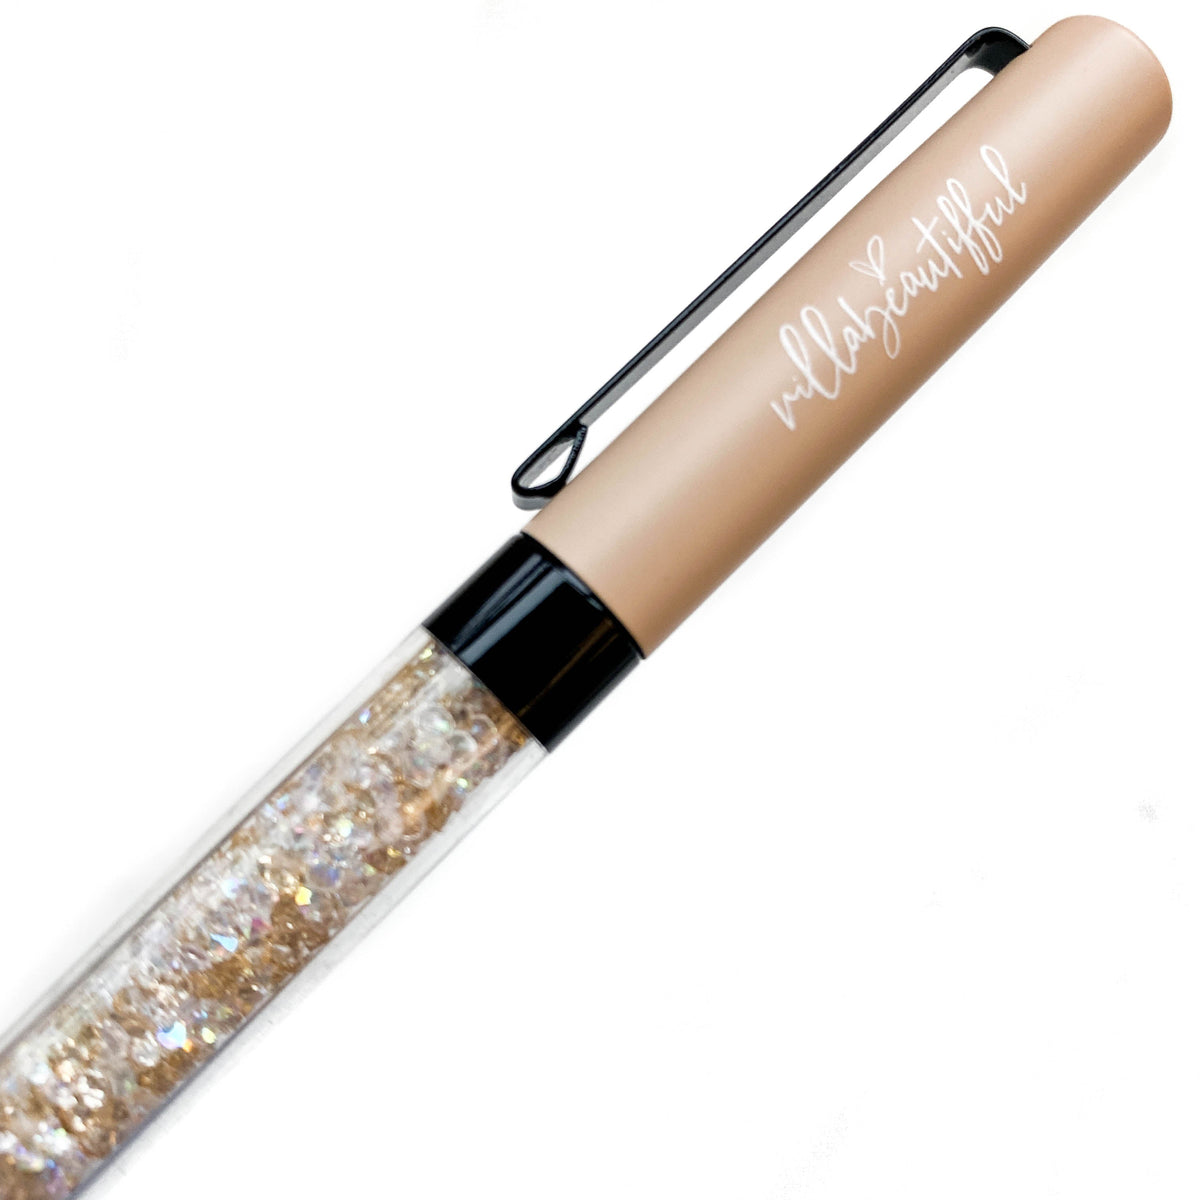 Flawless Imperfect Crystal VBPen | limited kit pen